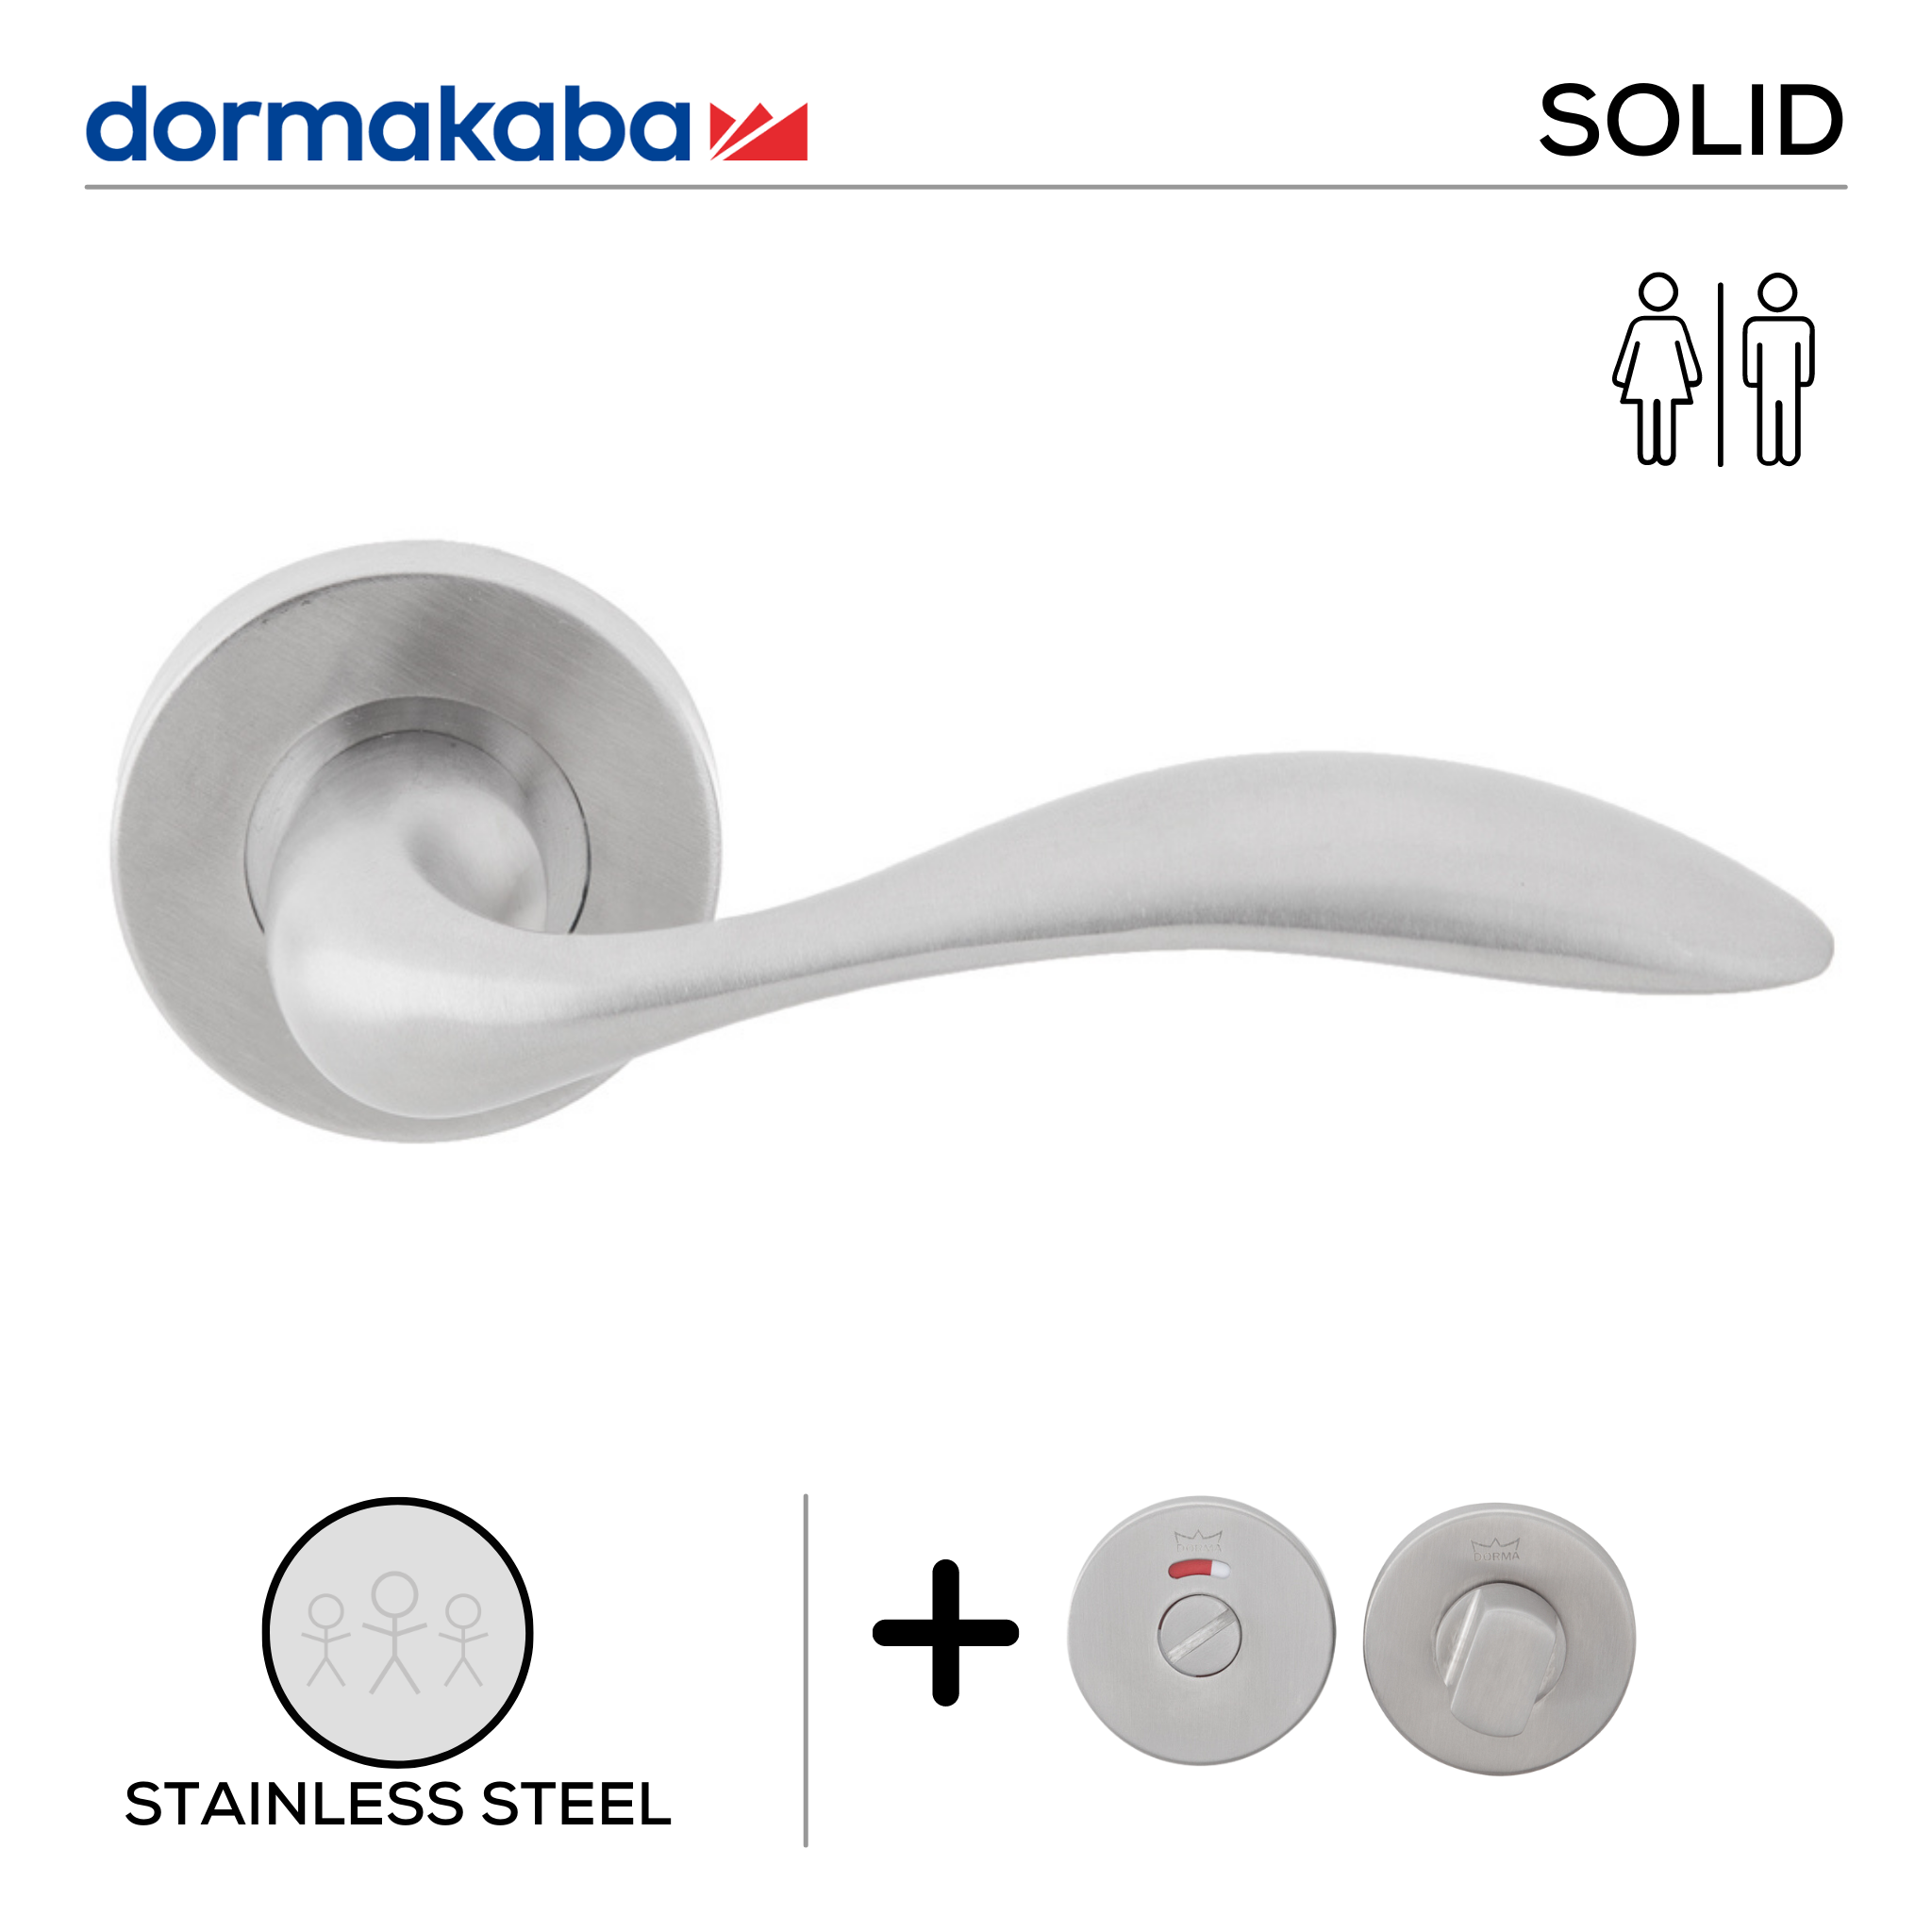 SH 817 Bathroom W/C, Lever Handles, Solid, On Round Rose, With Bathroom (WC) Indicator Set - DWC 005, 145mm (l), Stainless Steel, DORMAKABA